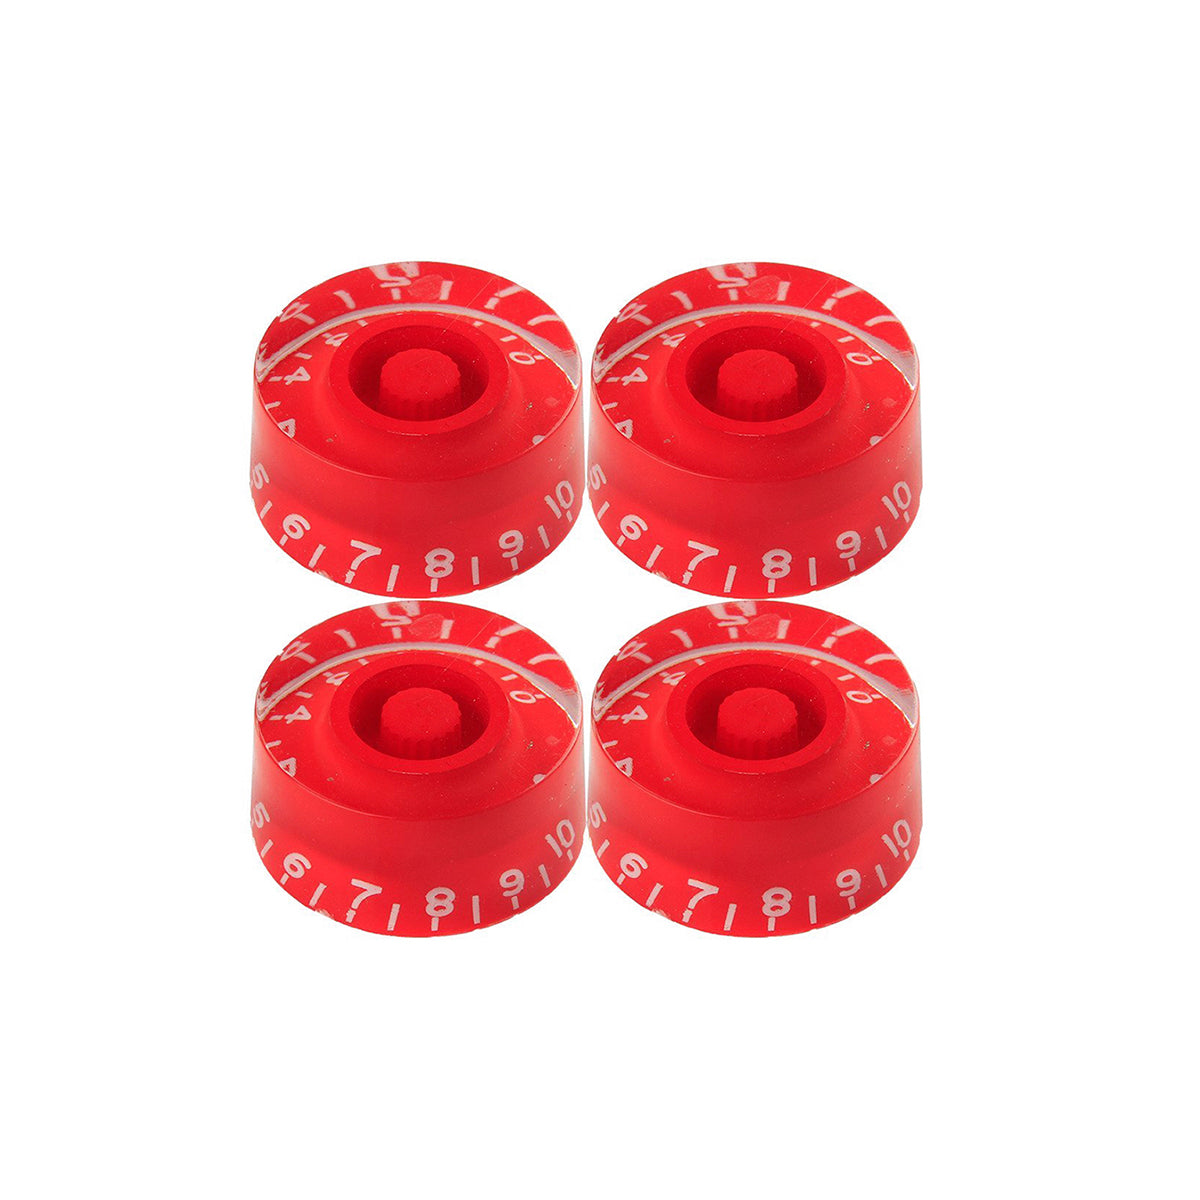 Musiclily Metric 6mm Plastic LP Style Guitar Speed Control Knobs ,Red with White Number( 4 Pieces)